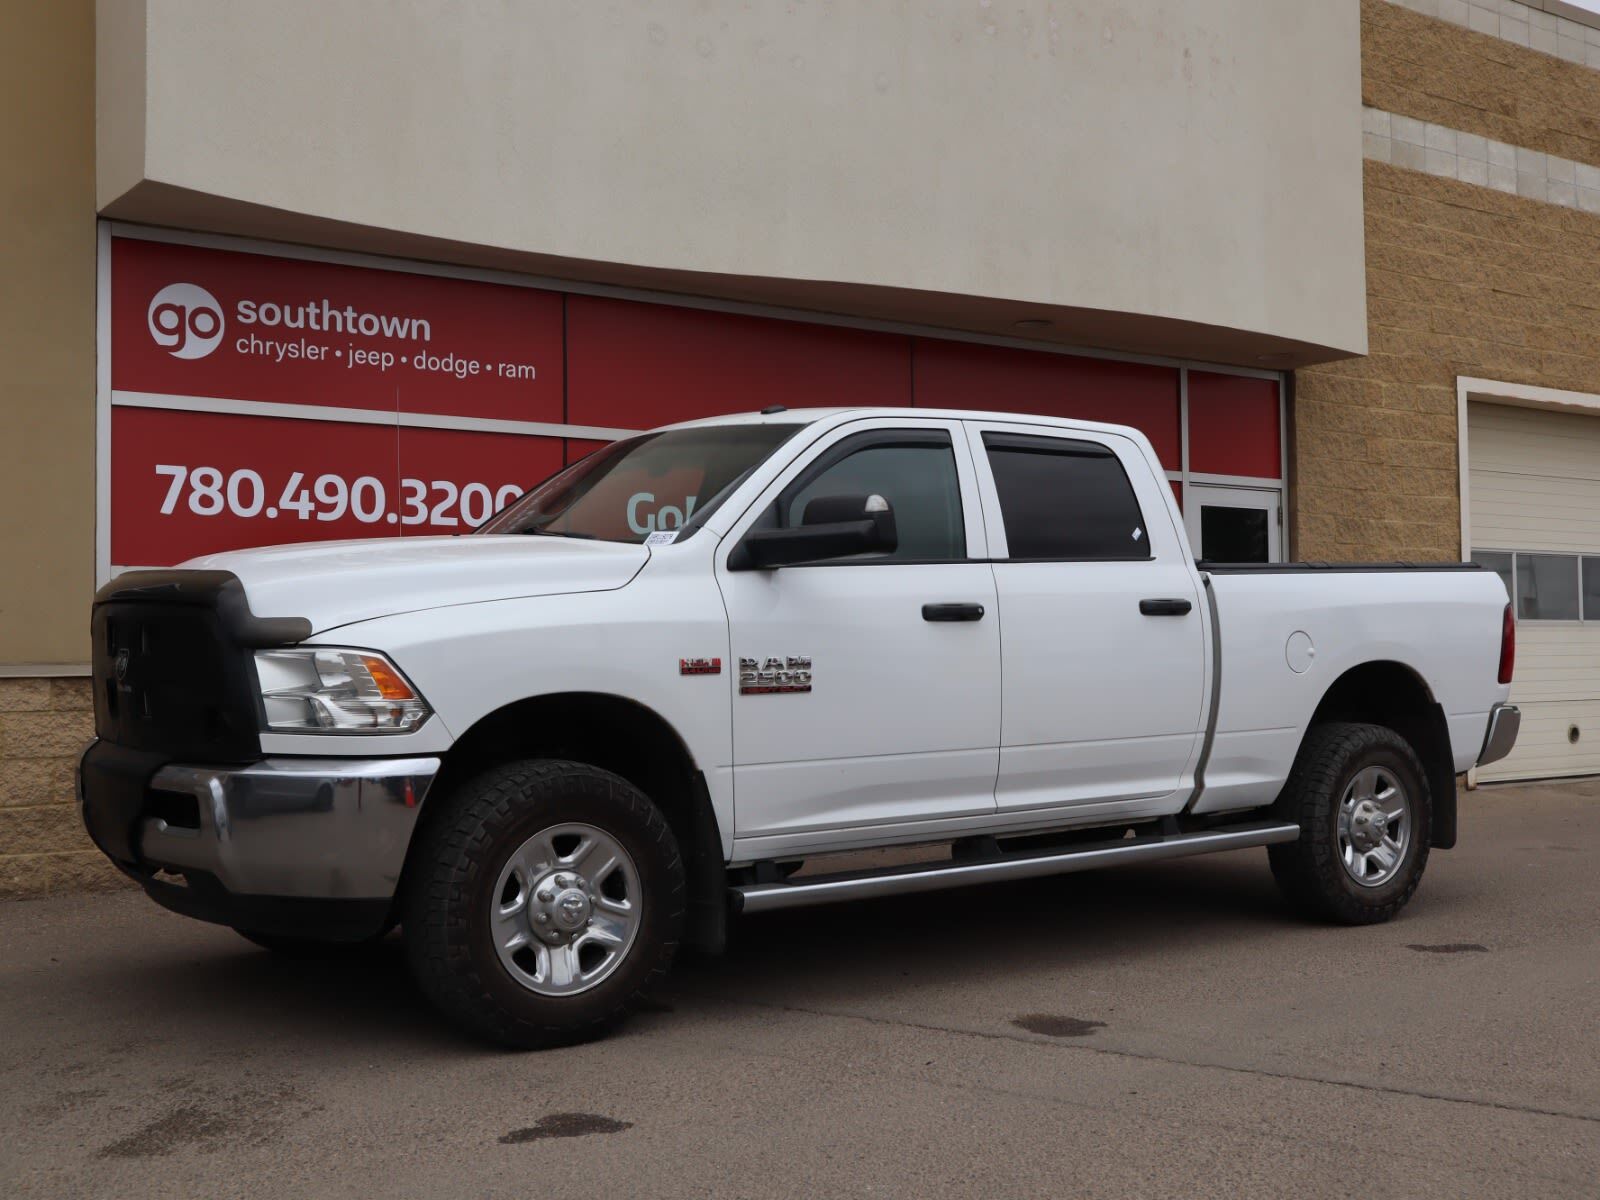 2014 Ram 2500 SLT IN BRIGHT WHITE EQUIPPED WITH A 6.4L HEMI V8 ,